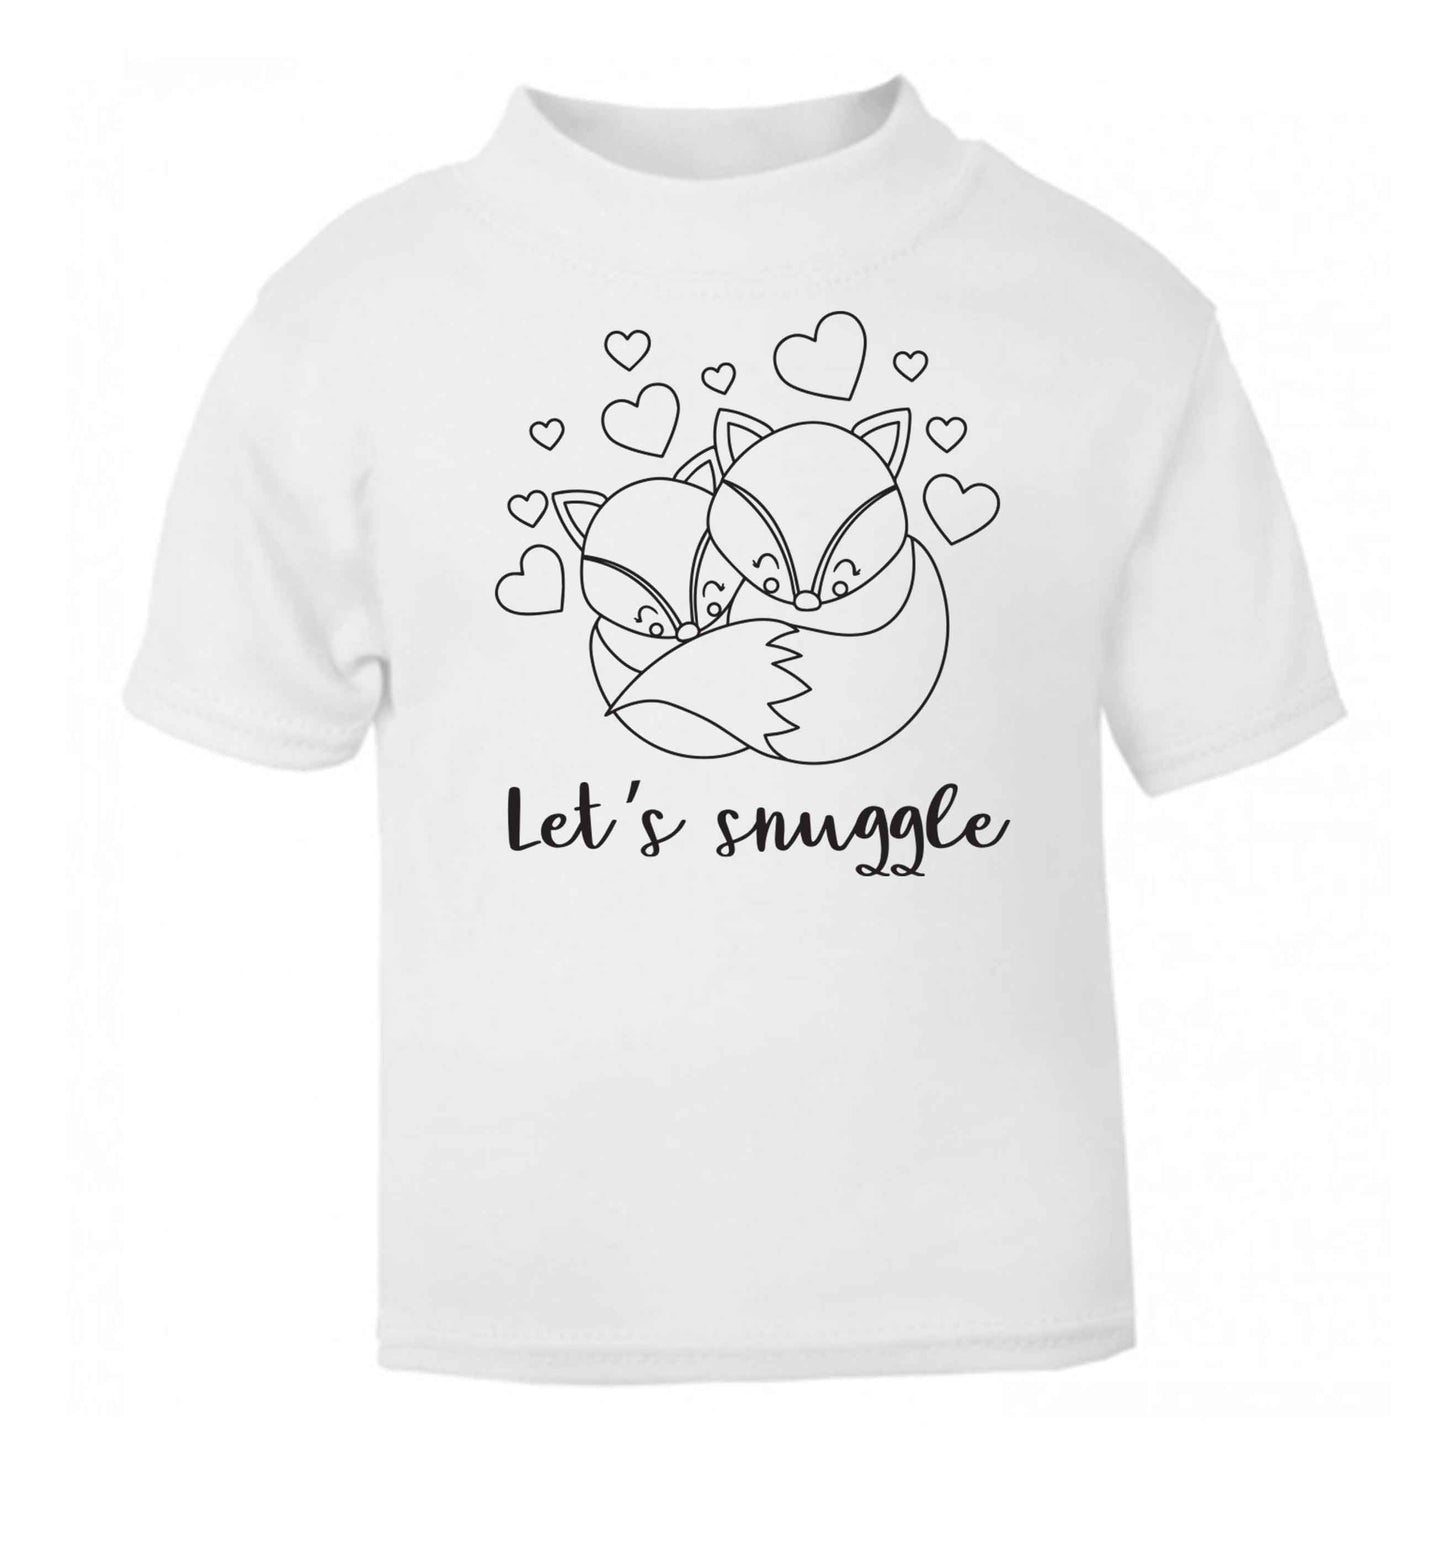 Let's snuggle white baby toddler Tshirt 2 Years